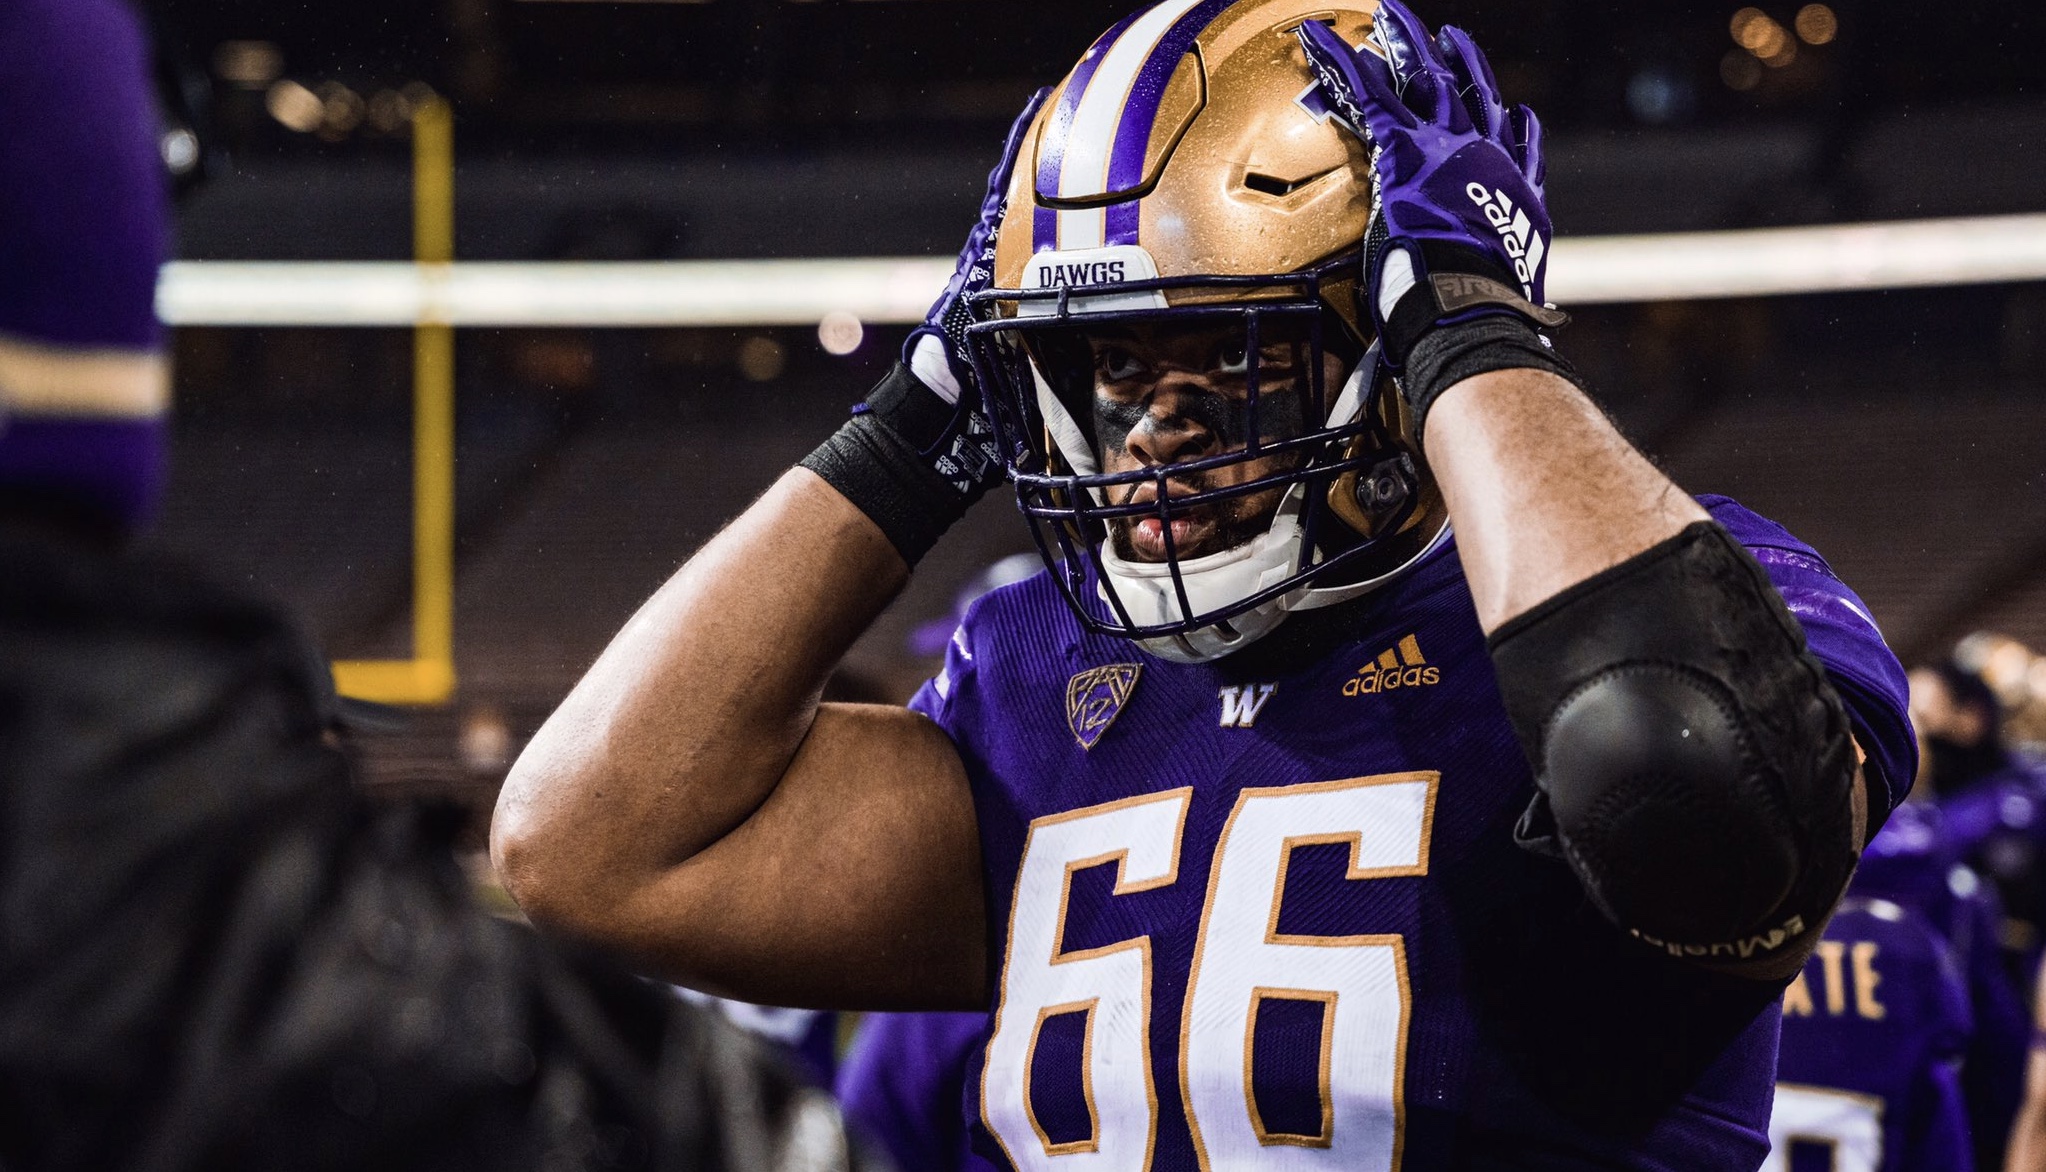 UW Roster Review, No. 0-99: Bainivalu Has Big Appetite, Will Play for Food